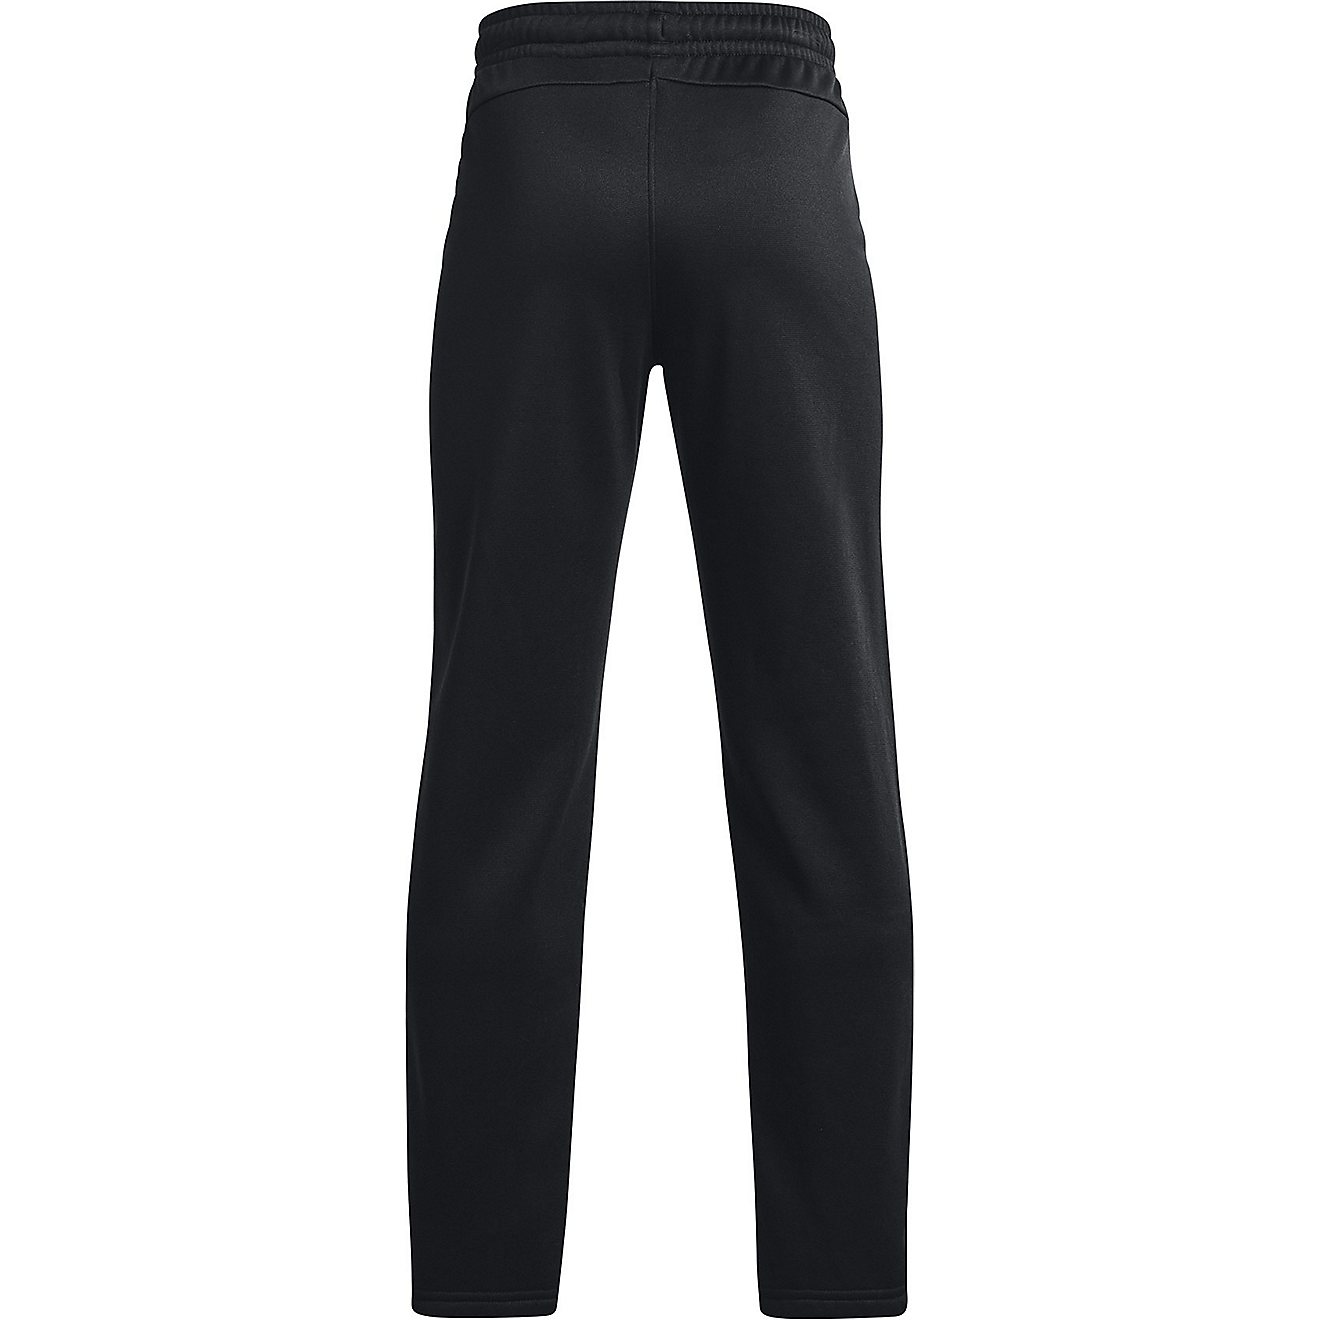 Under Armour Boy’s Armour Fleece Pants                                                                                         - view number 2